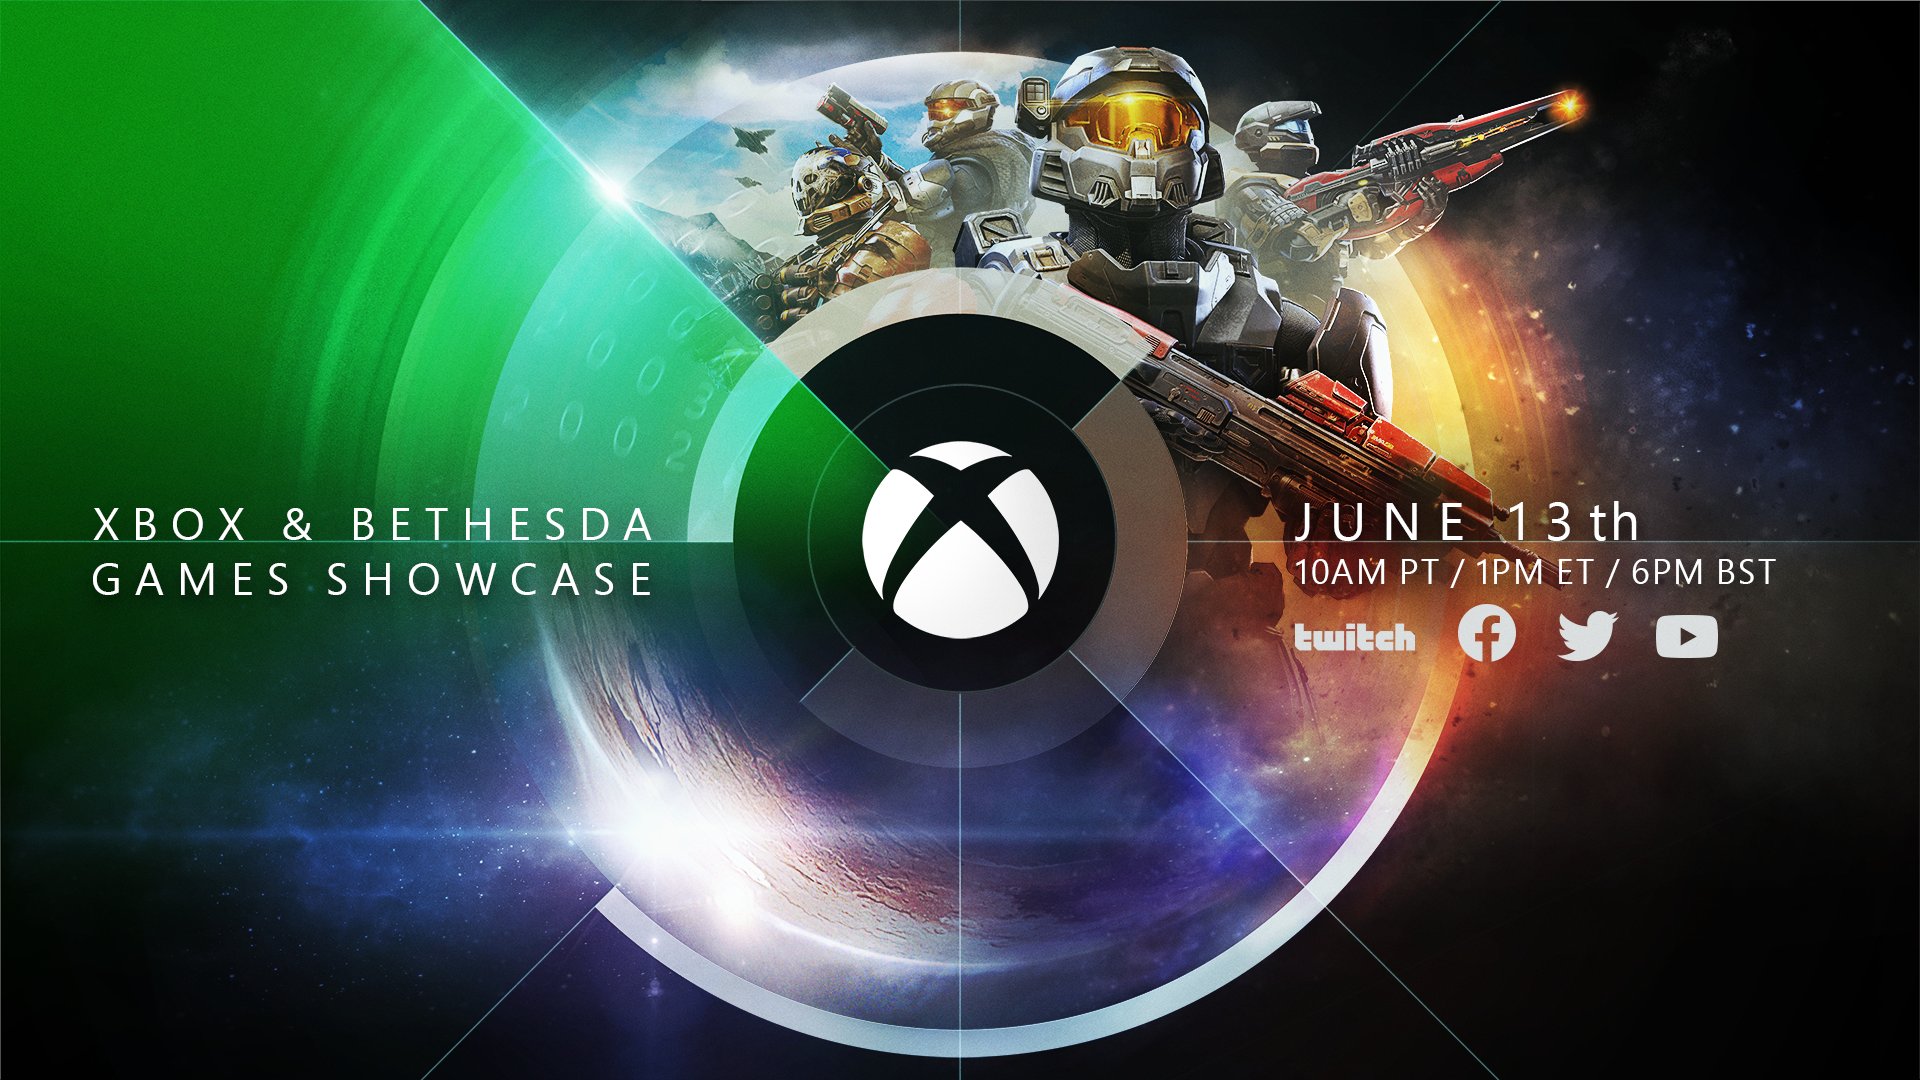 The Xbox logo positioned in the center of a planet. Text on the left reads "Xbox & Bethesda Games Showcase" and text on the right reads "June 13th, 10 AM PT/ 1 PM ET / 6 PM BST" above logos from Twitch, Facebook, Twitter, and YouTube. Various armored soldiers from the Halo universe are on the top right. 